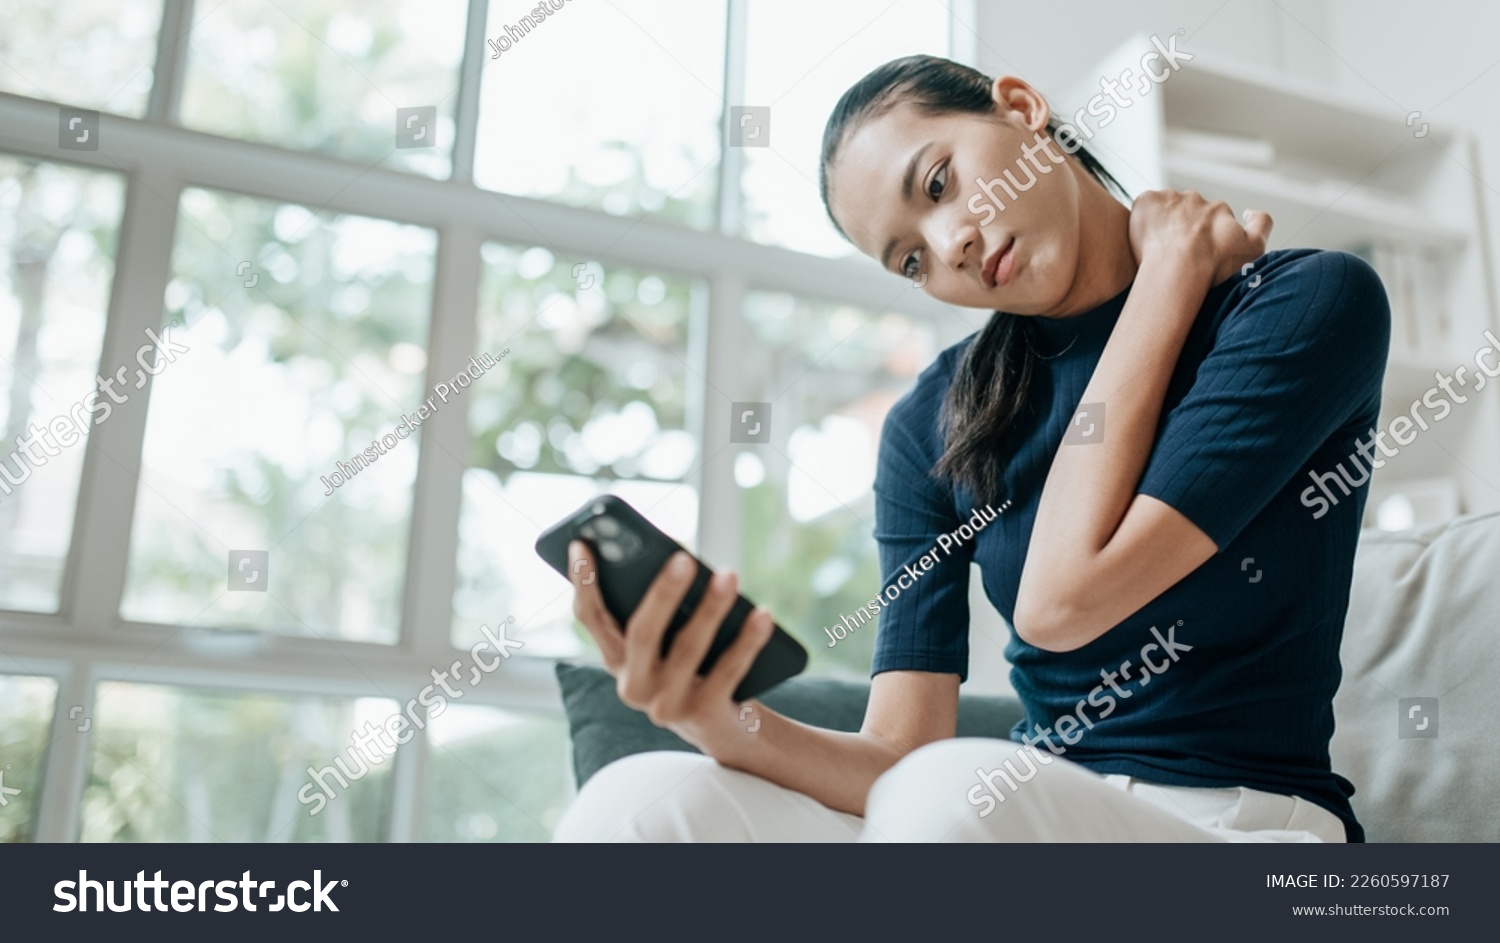 Portrait of Unhappy asian woman suffering from pain in the neck while sitting on the sofa and using mobile phone in the living room. Lifestyle, health care and medical concepts. #2260597187